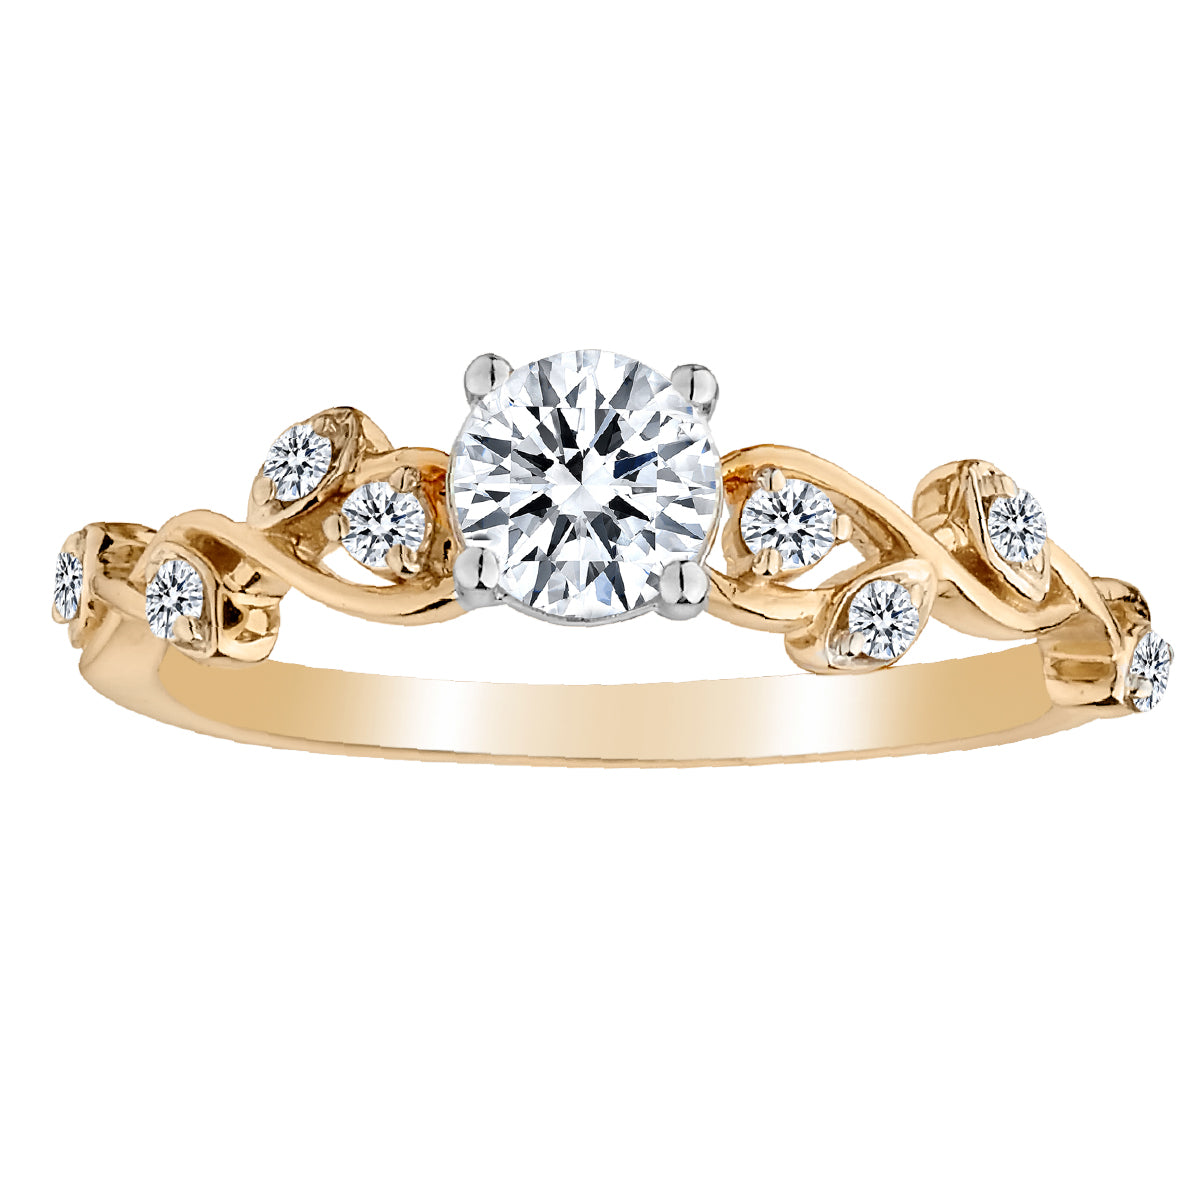 .65 Carat Total Diamond Weight,  .50 Carat Round Brilliant Centre Diamond,  "Tree Of Life" Diamond Engagement Ring,  14kt White and Yellow Gold (Two Tone). Griffin Jewellery Designs